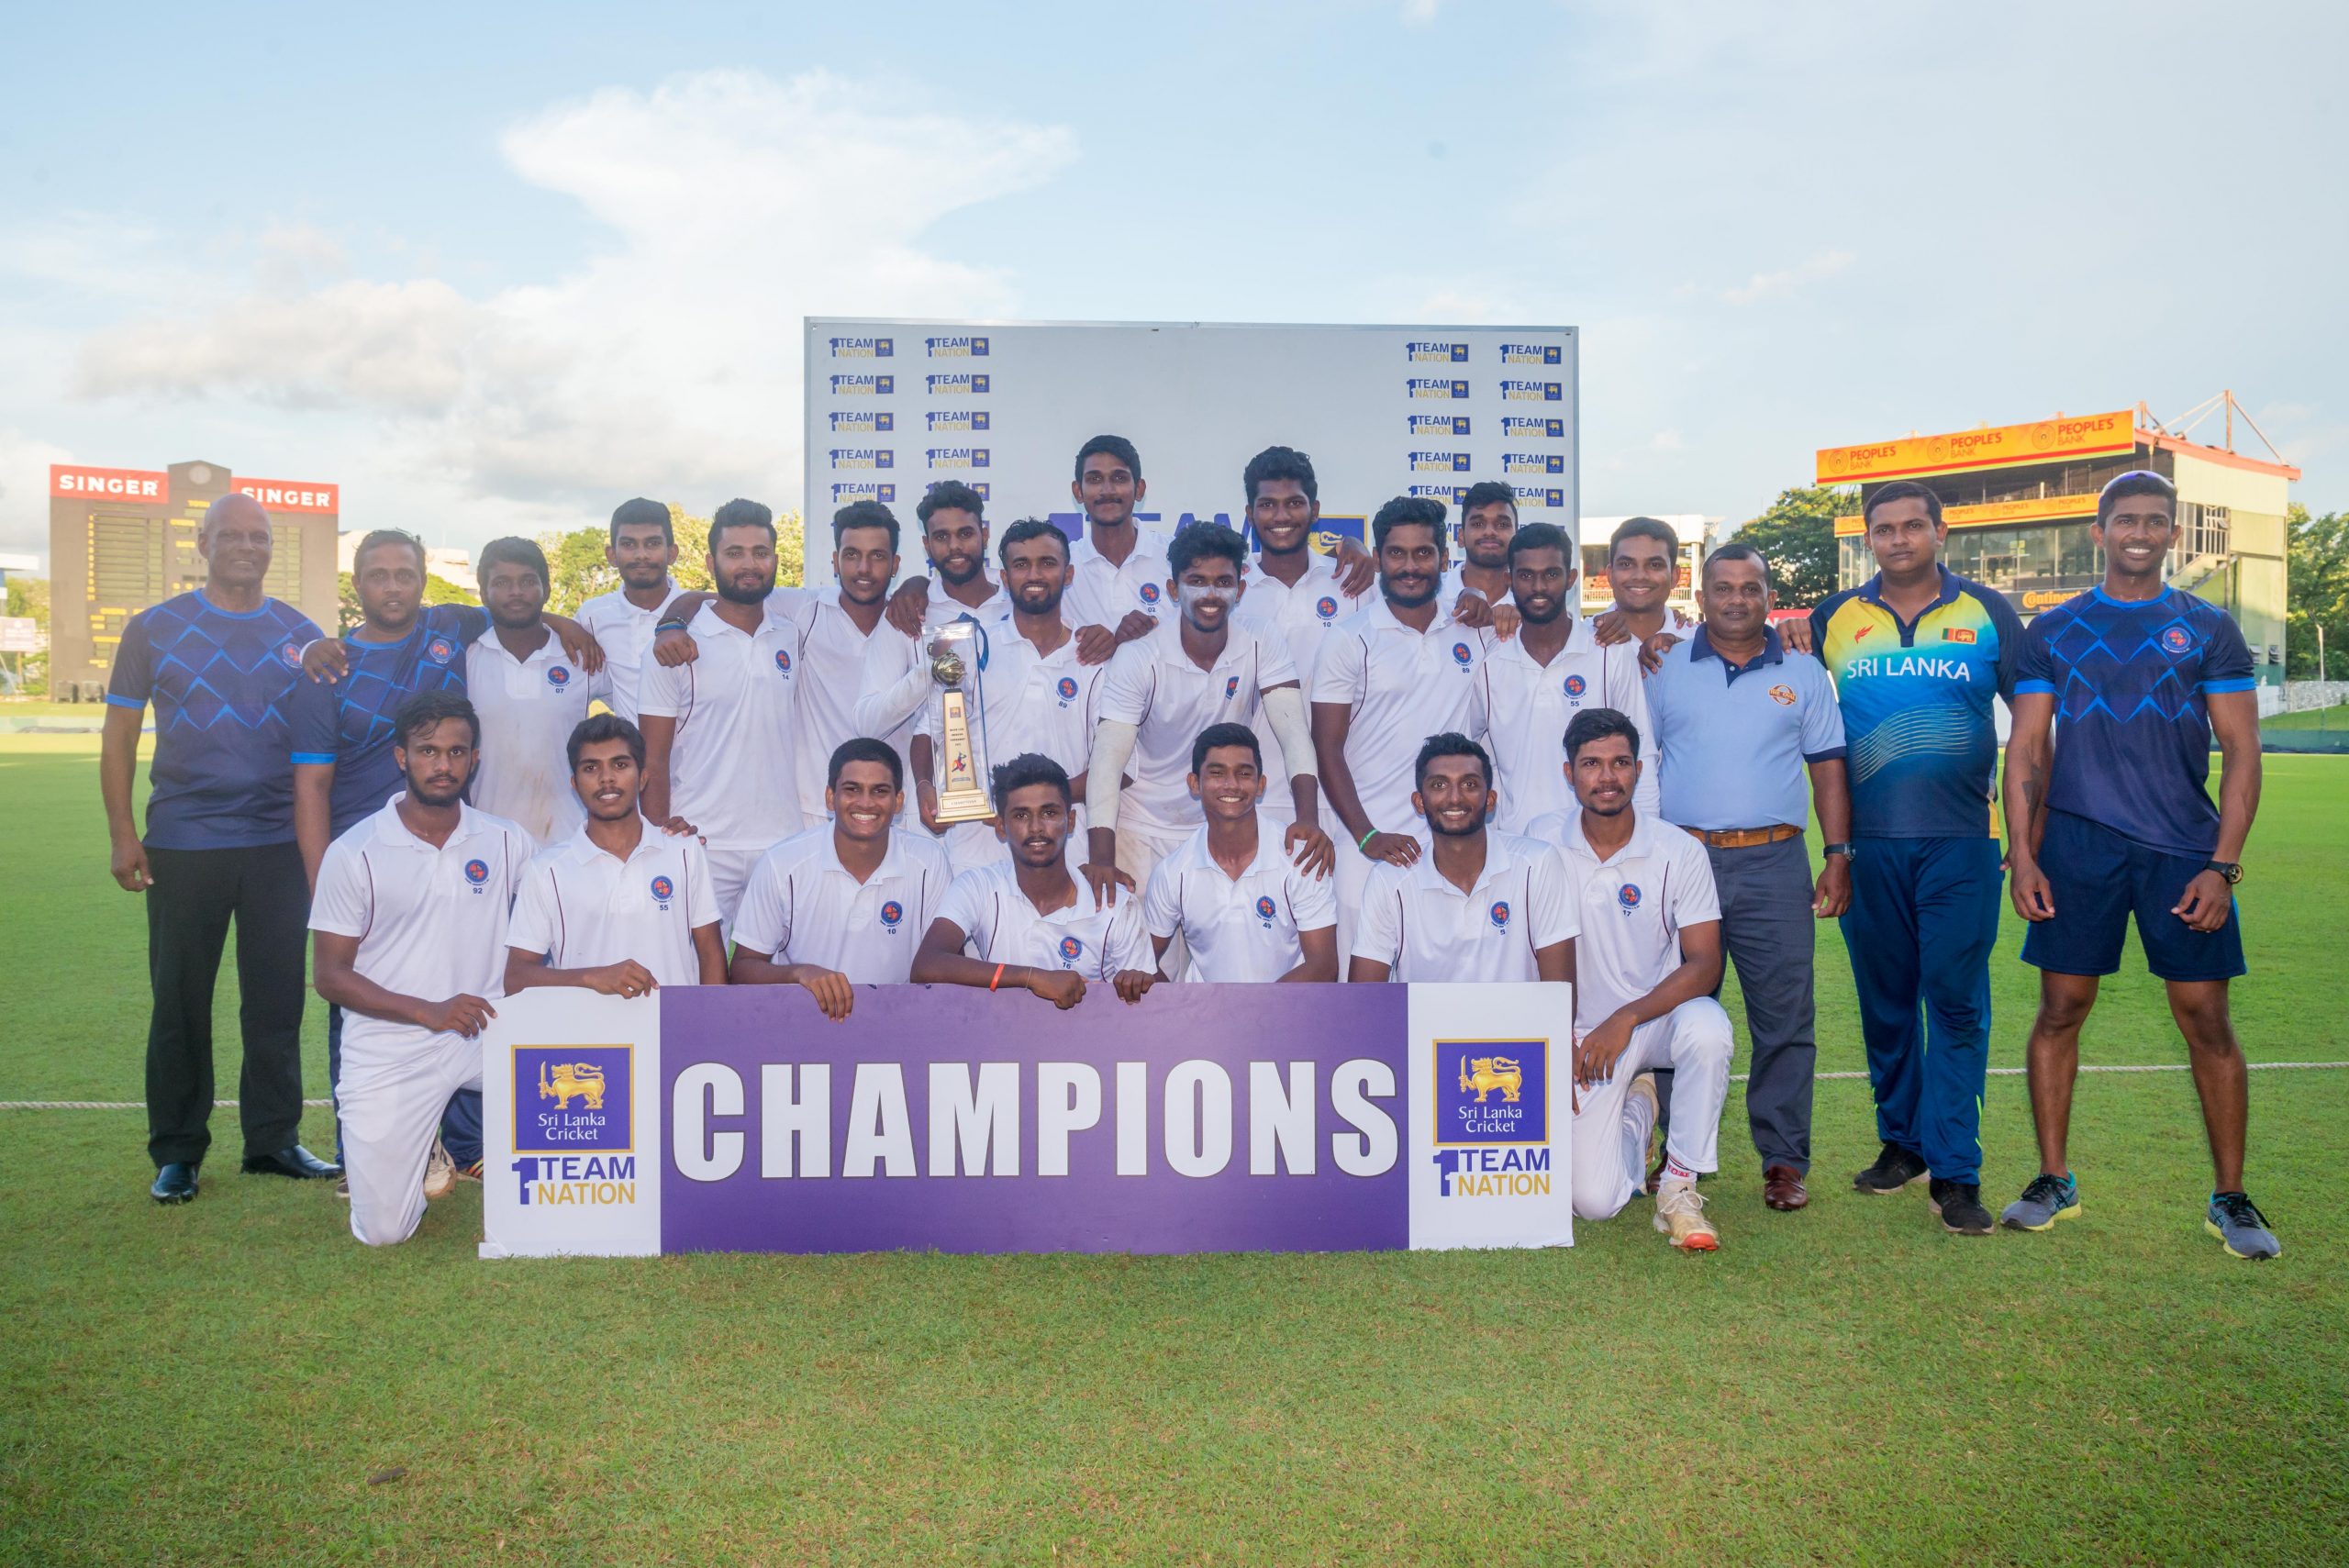 Tamil Union overcome Sebastianites spirited fight back to emerge champs by 44 runs